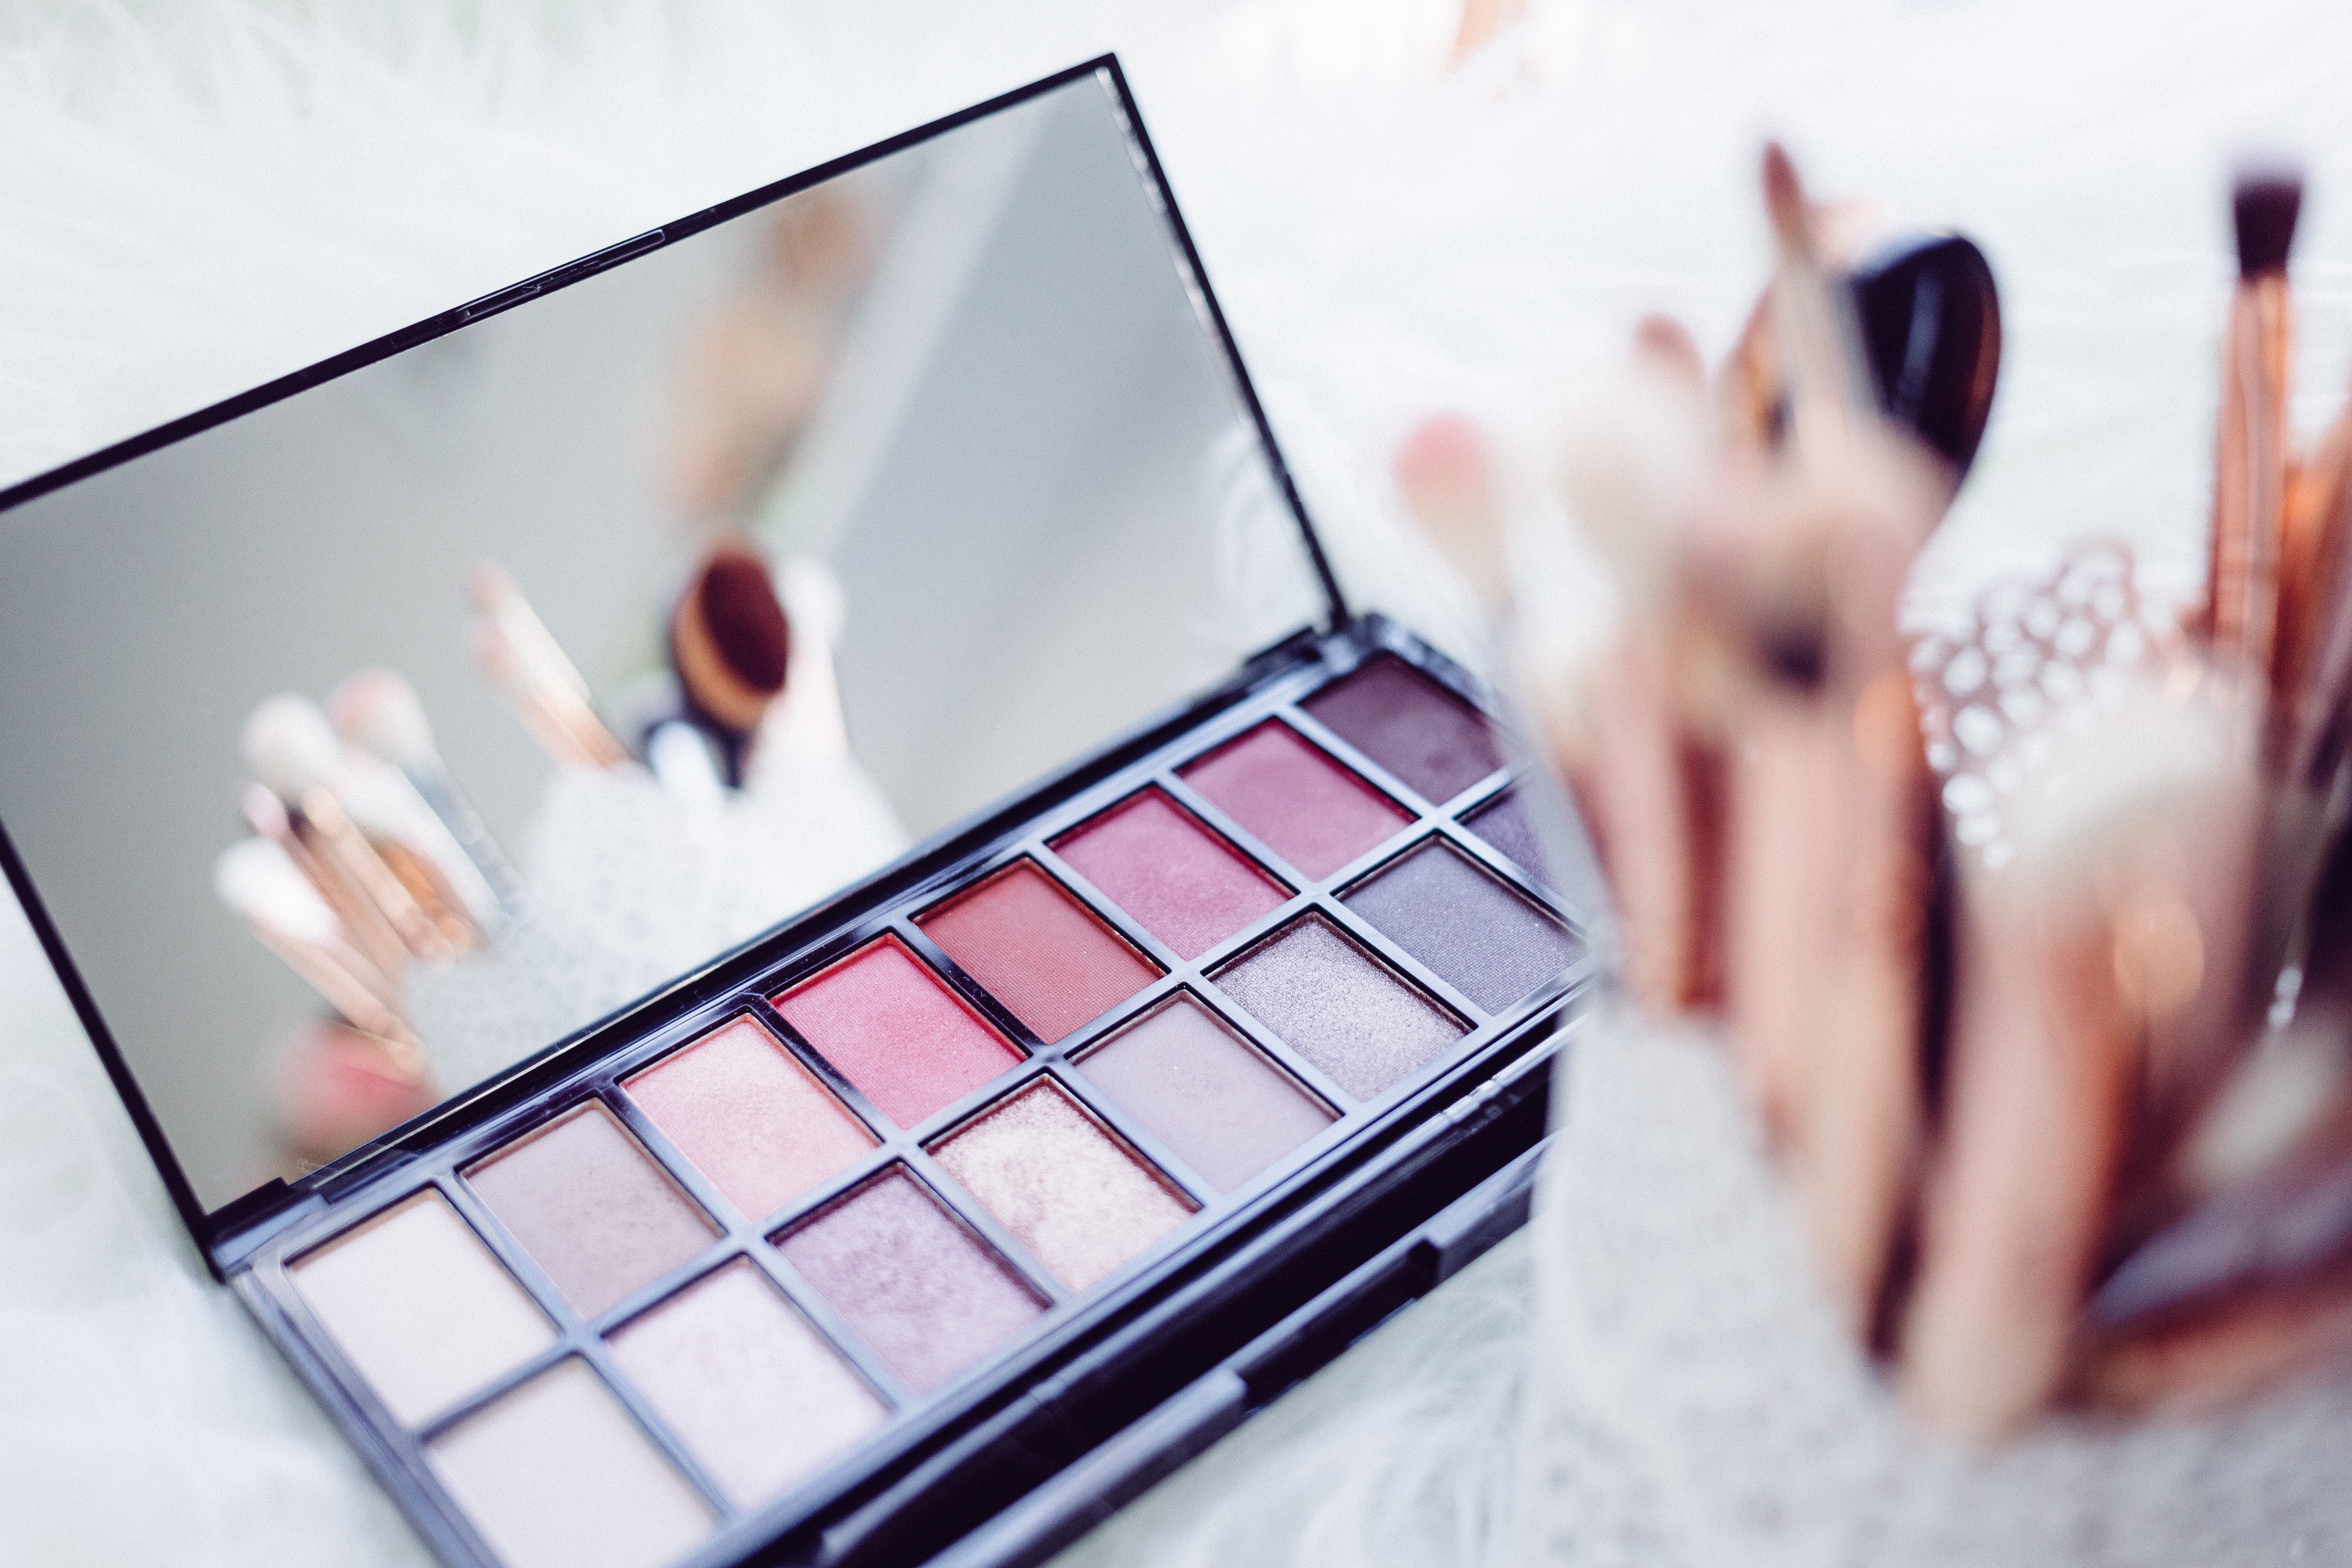 Find Hair And Makeup Artists in   Mindarie Get the best prices from 2,000+ of the most reviewed Hair And Makeup Artists  near Mindarie. Pick from mobile stylists or salons.